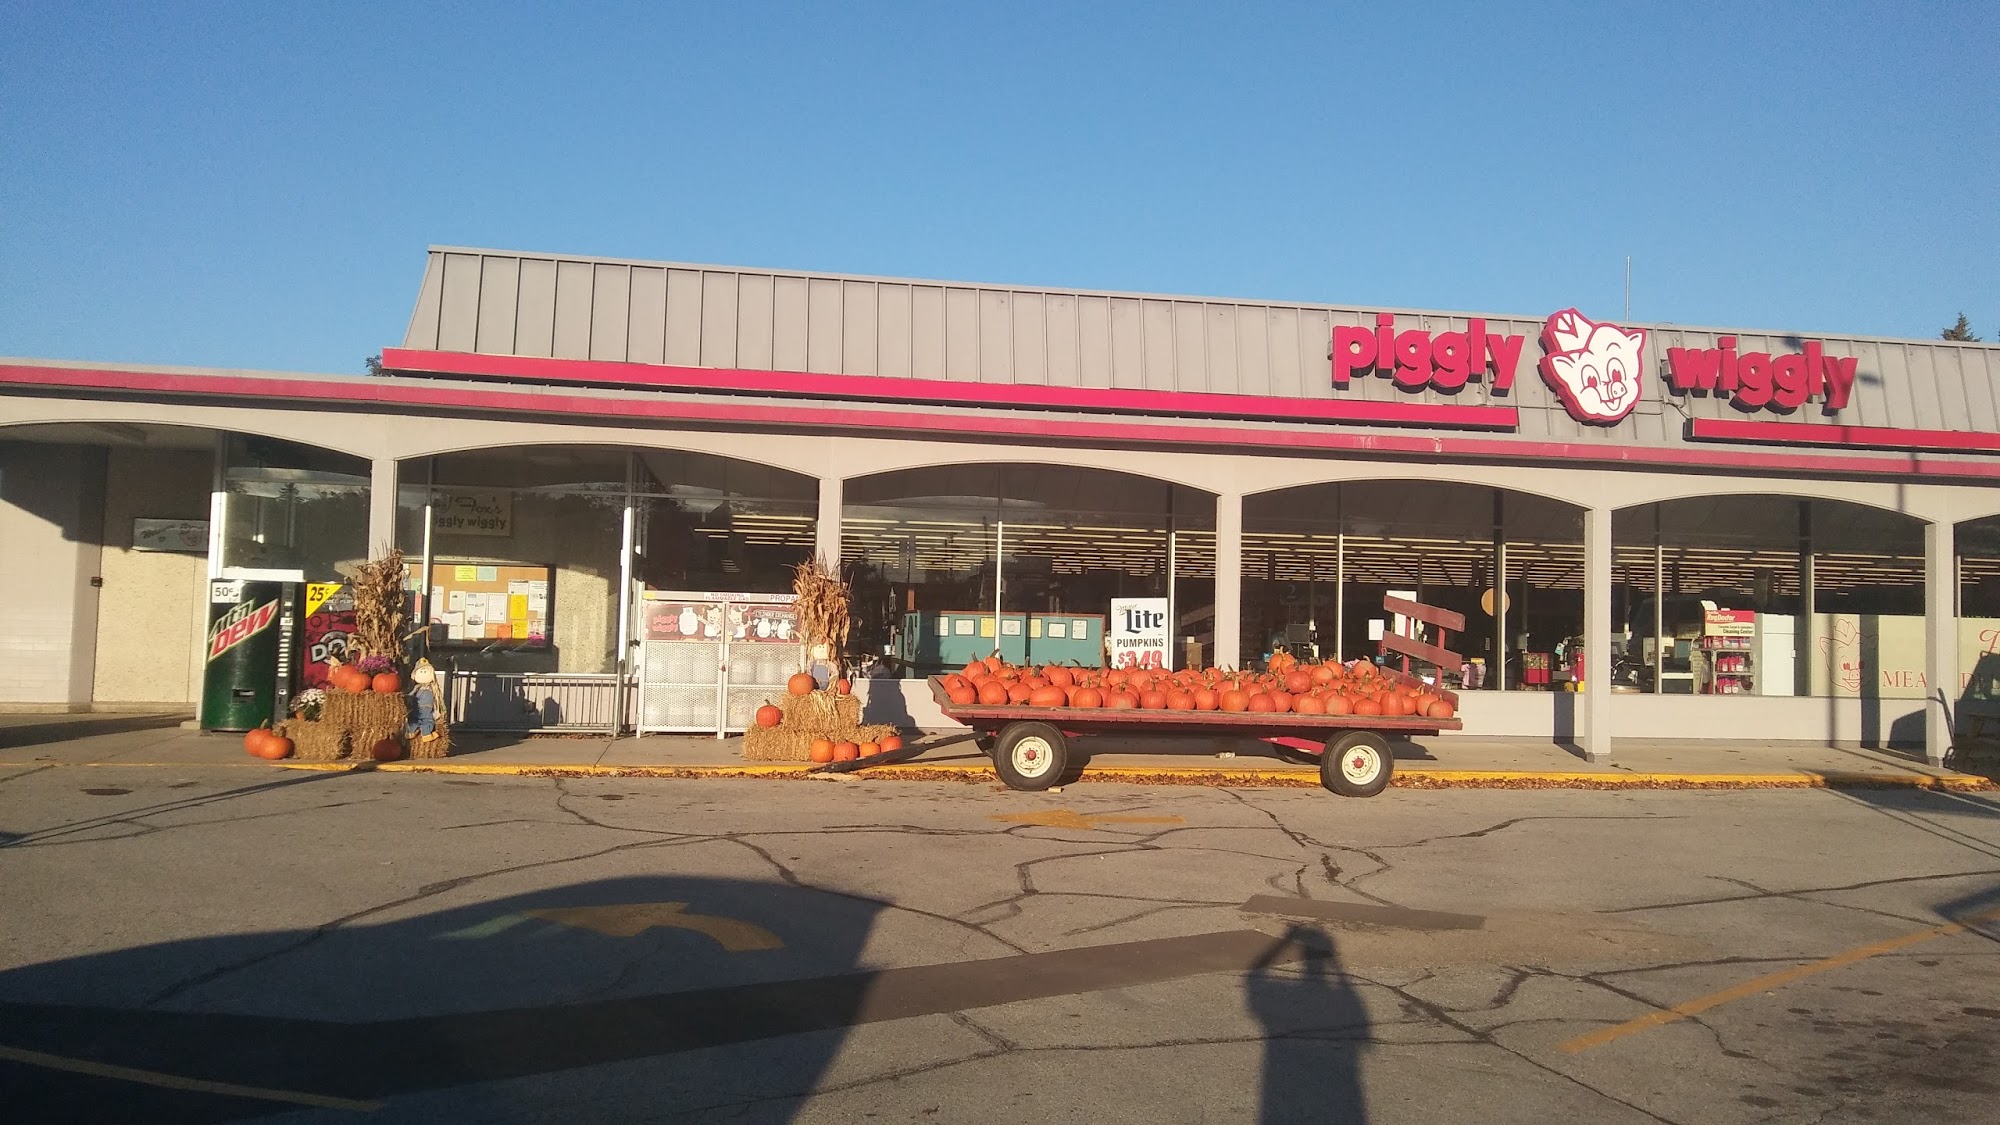 Tietz's Piggly Wiggly